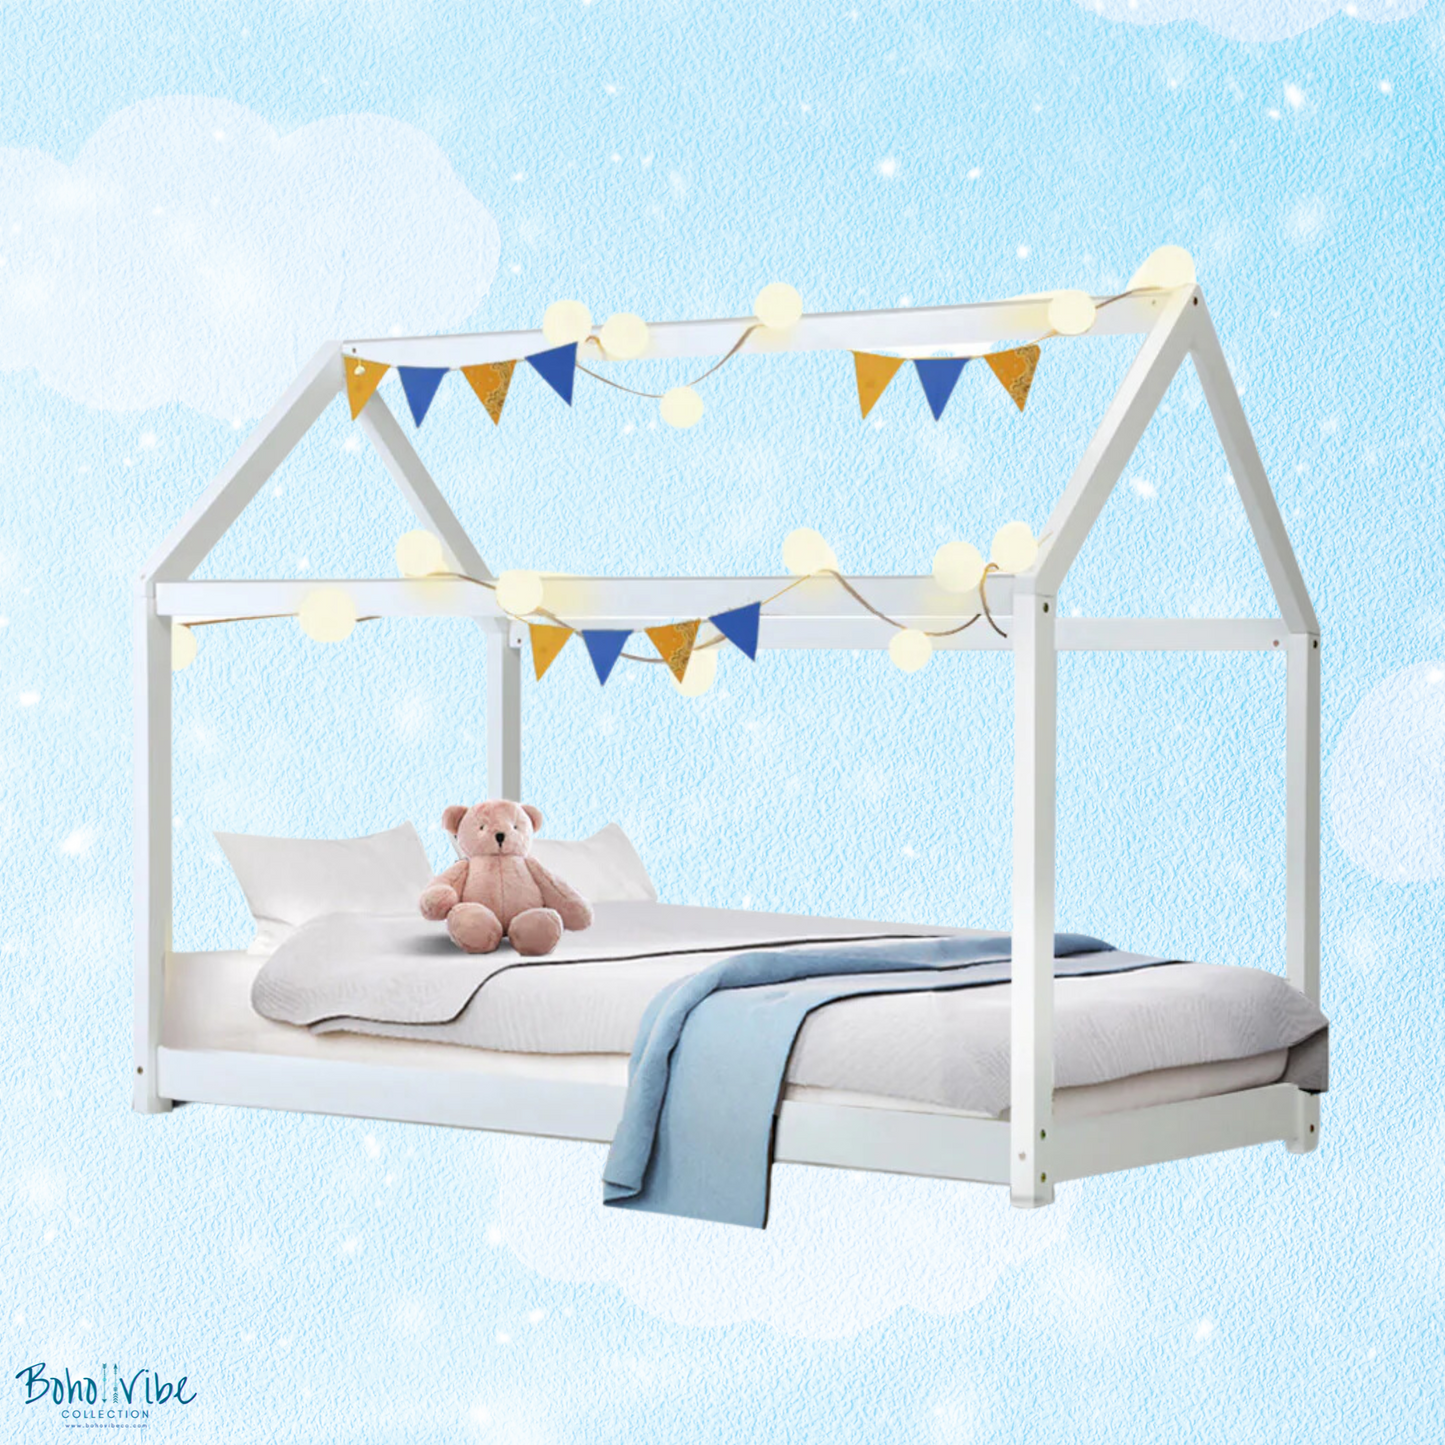 Boho ↡↟ Vibe Collection ↠ Kids Home Shaped White Bed Frame Single Sized Childrens House Wooden Bed 